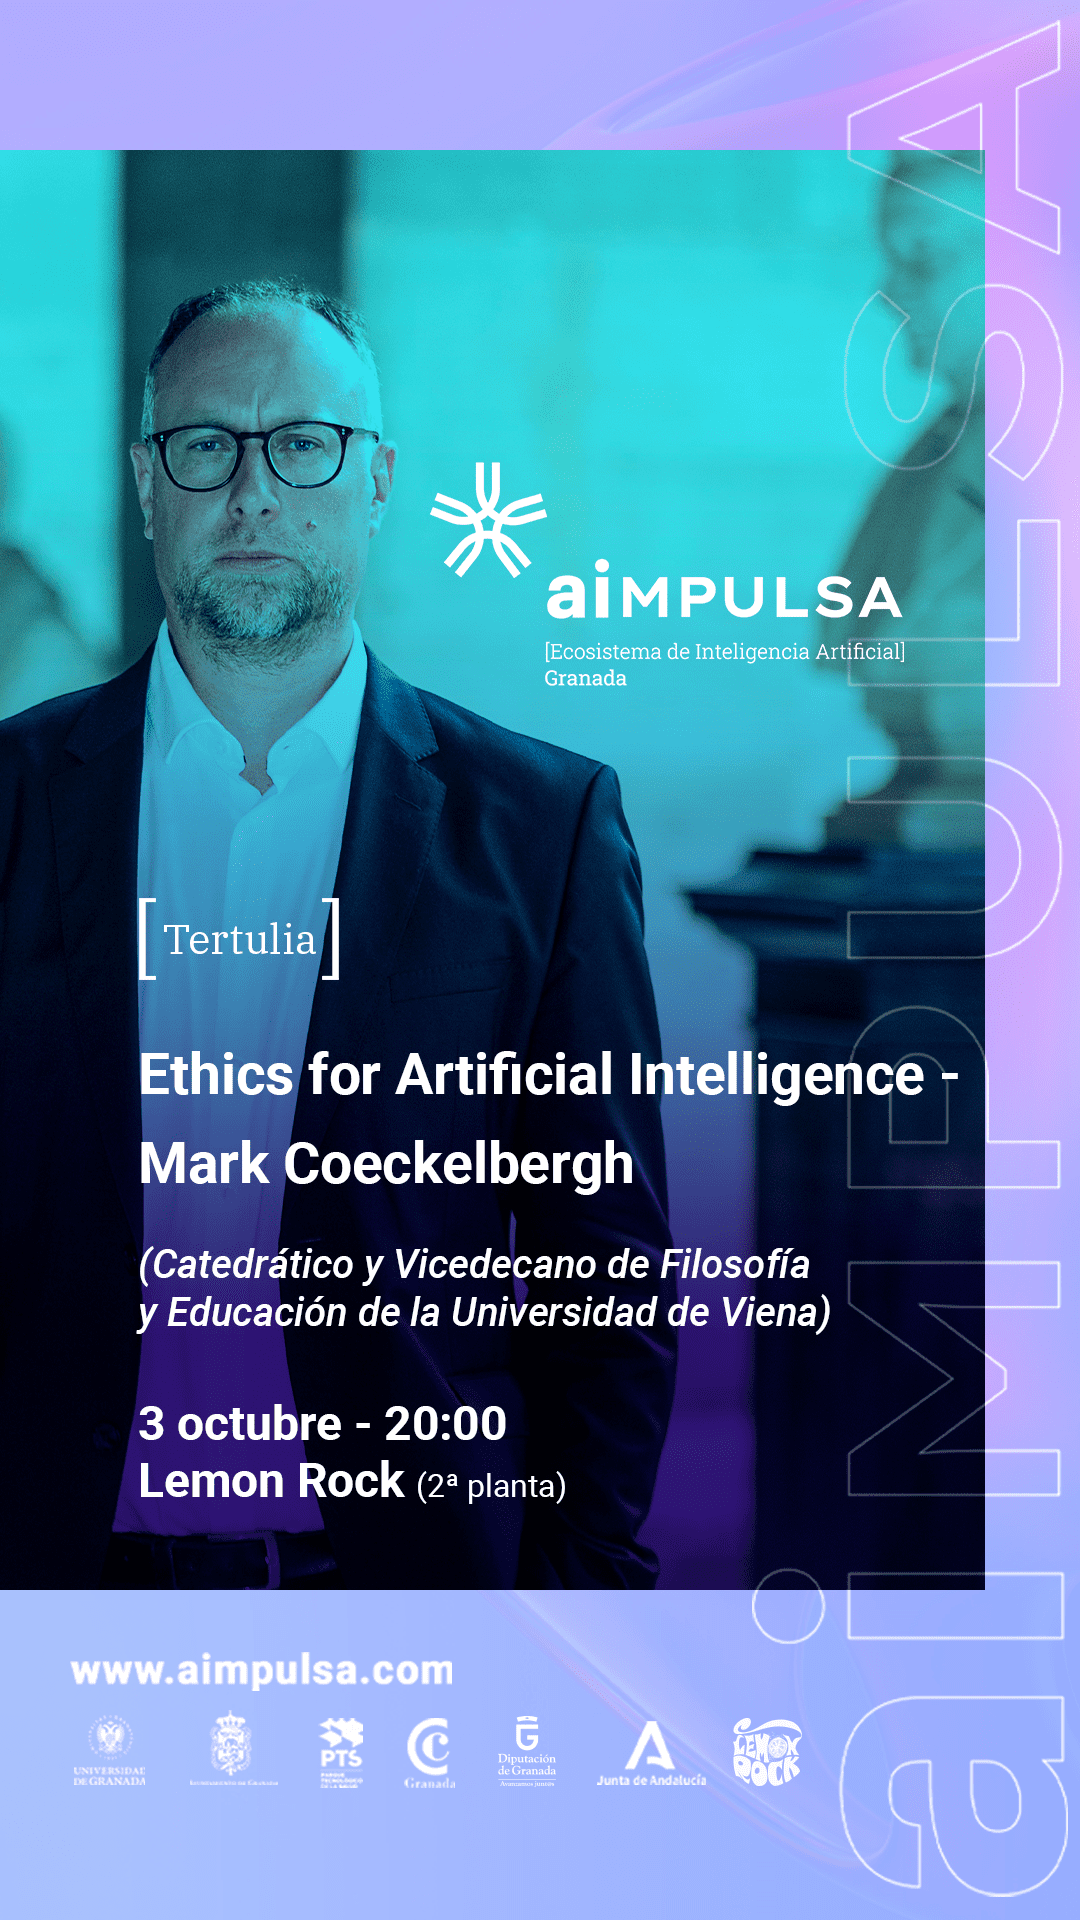 Ethics for Artificial Intelligence